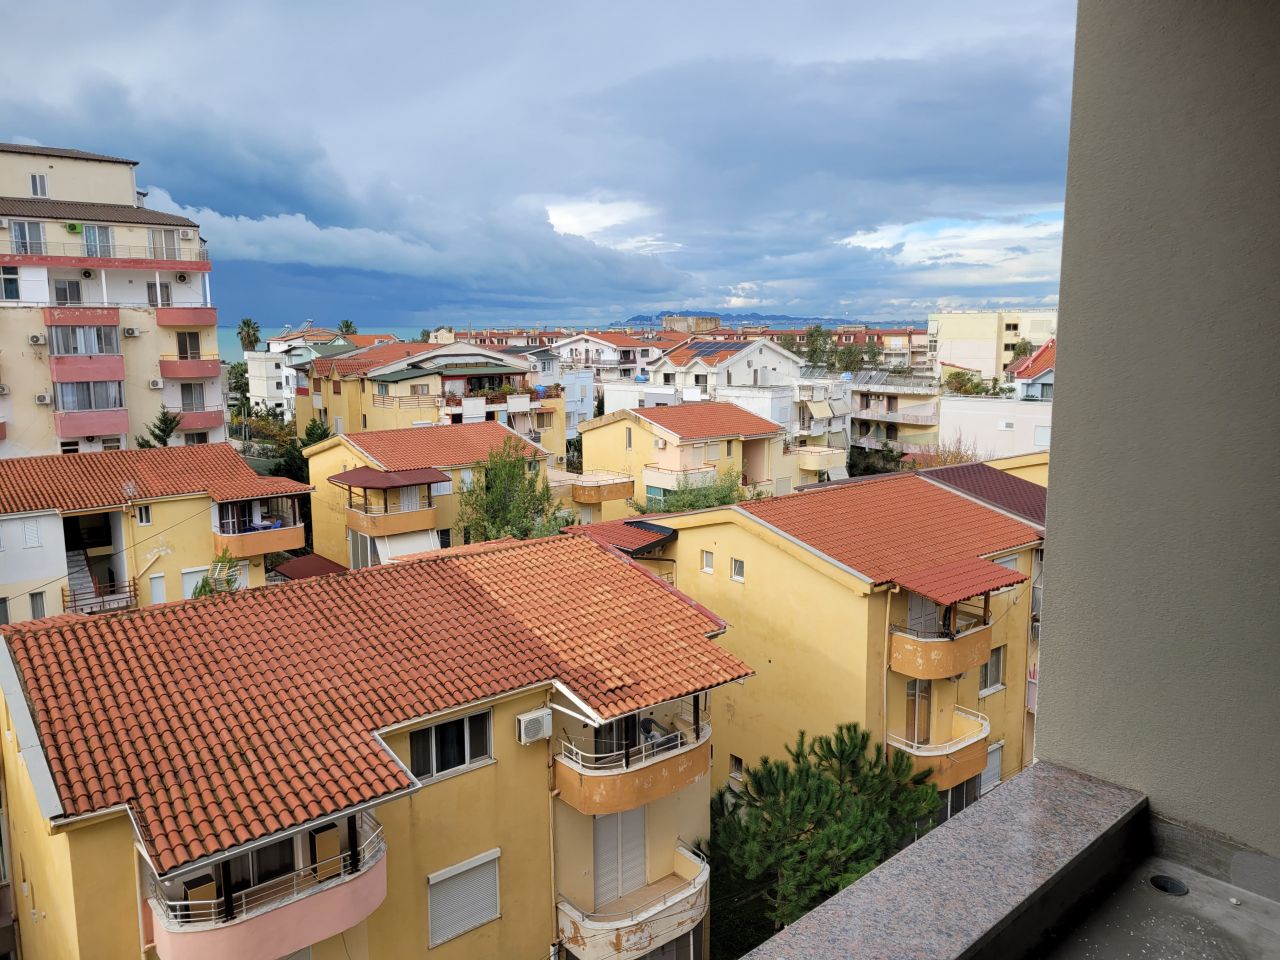 One Bedroom Apartment For Sale In Golem Durres Albania, Located In A Quiet Area, Near The Beach